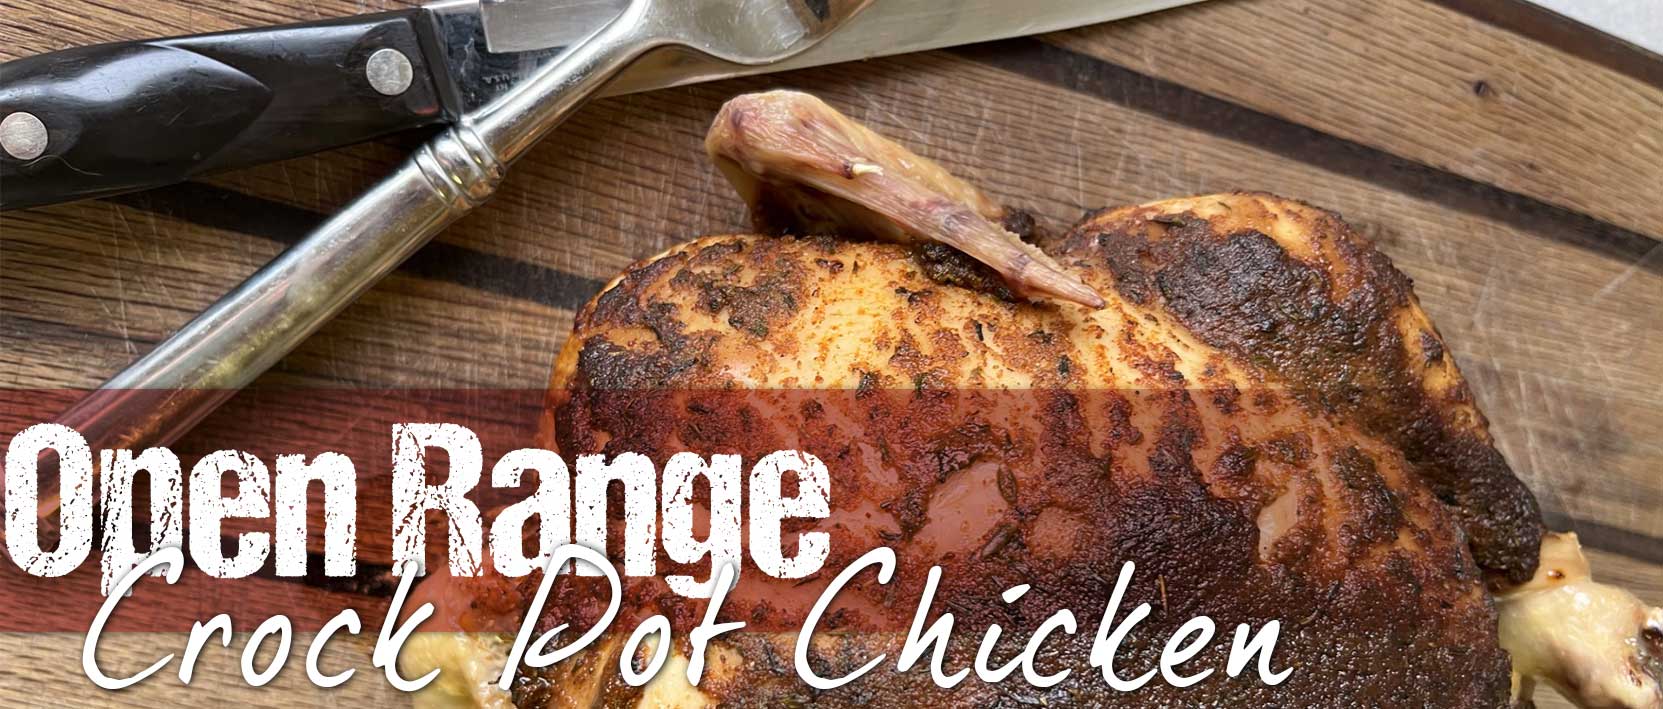 You are currently viewing Open Range Crock Pot Chicken